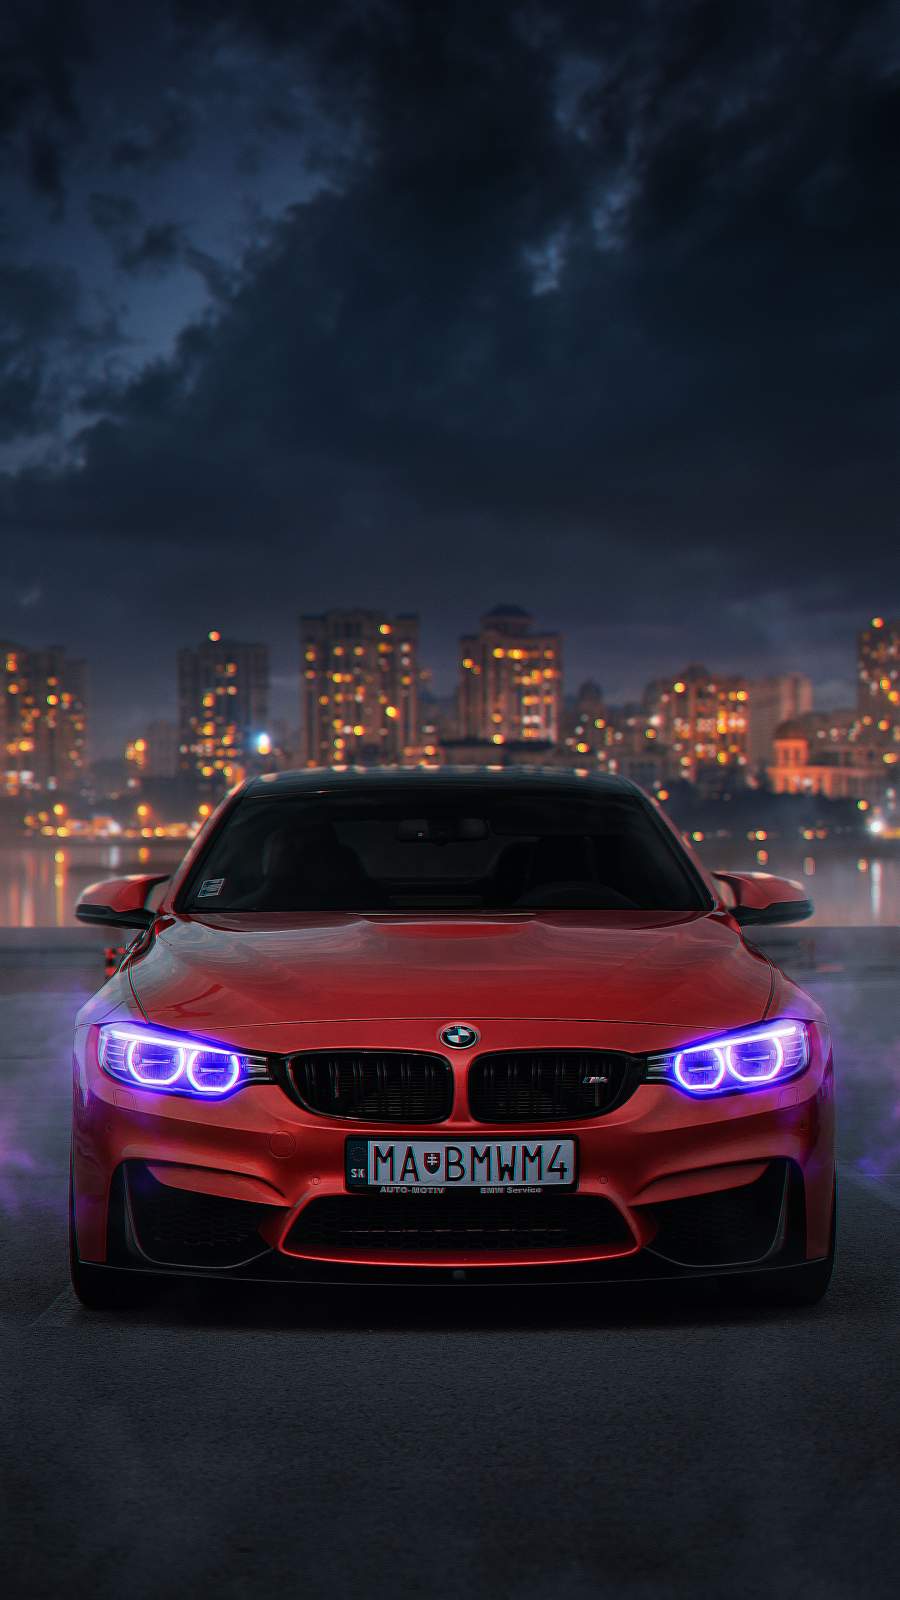 Free Cars Iphone Wallpaper Downloads 100 Cars Iphone Wallpapers for  FREE  Wallpaperscom